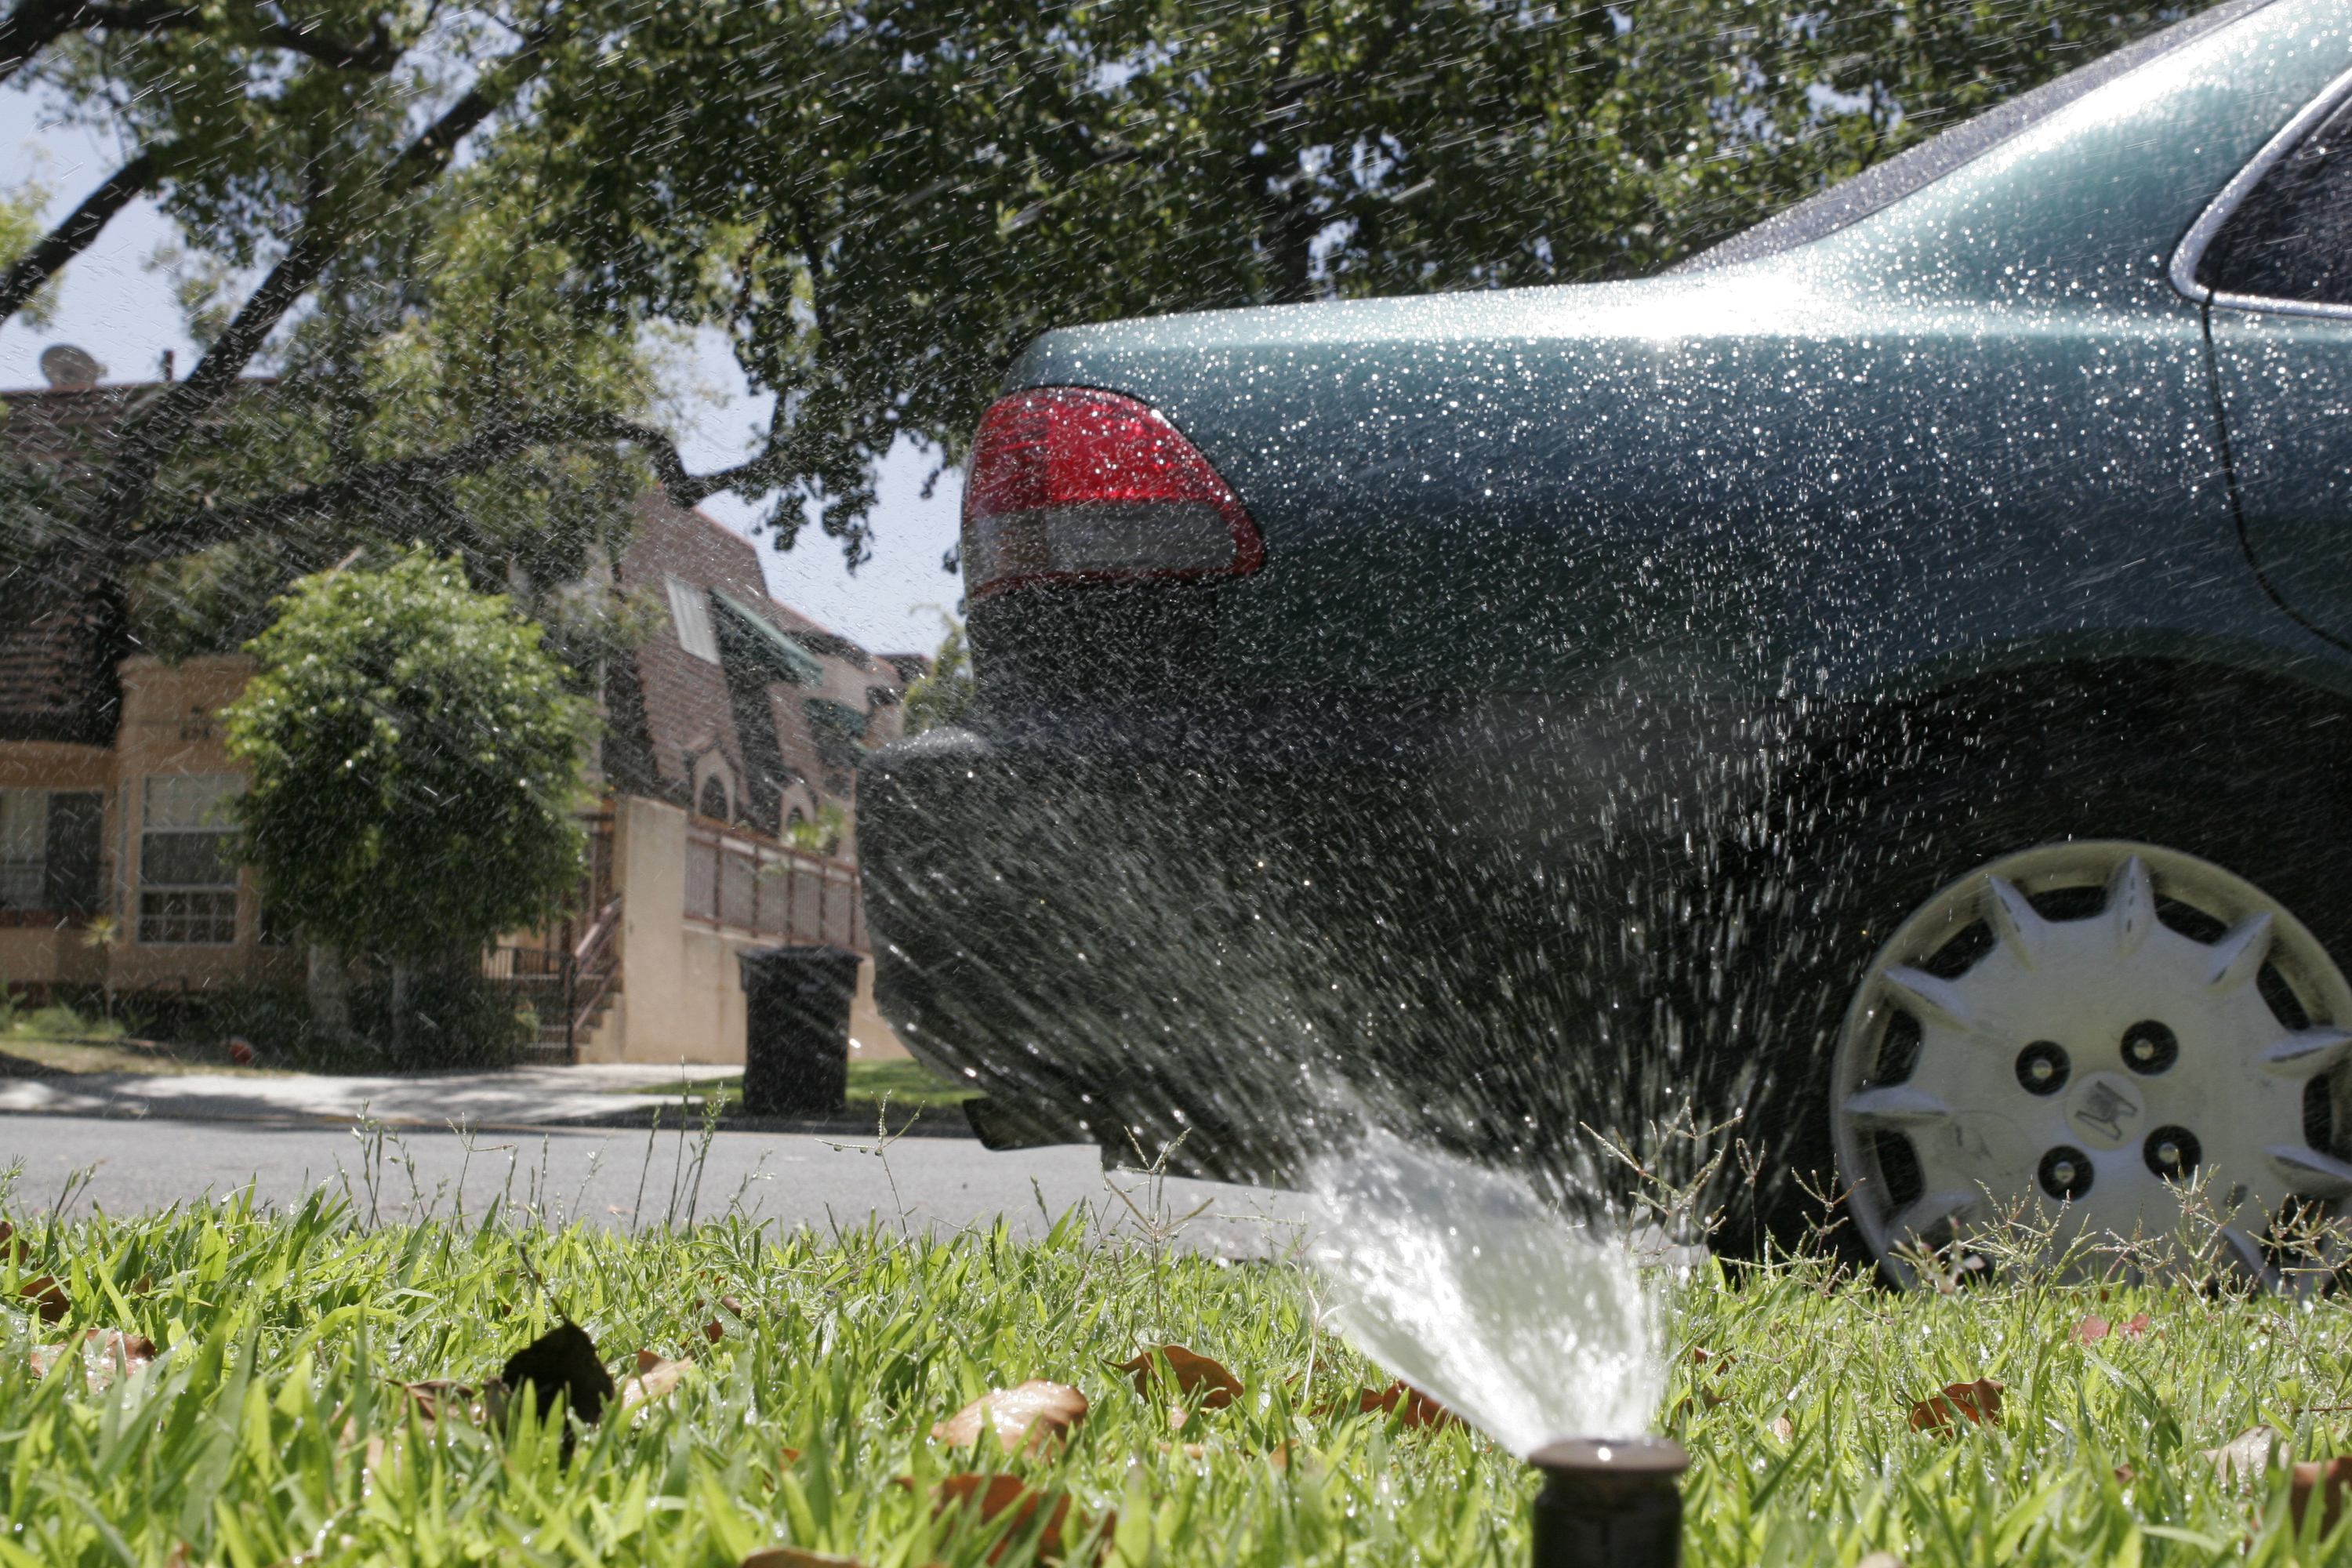 A sprinkler system sprays water onto a parked car along the curb in Glendale, Calif., Wednesday, July 9, 2014. (Matt Hamilton—AP)